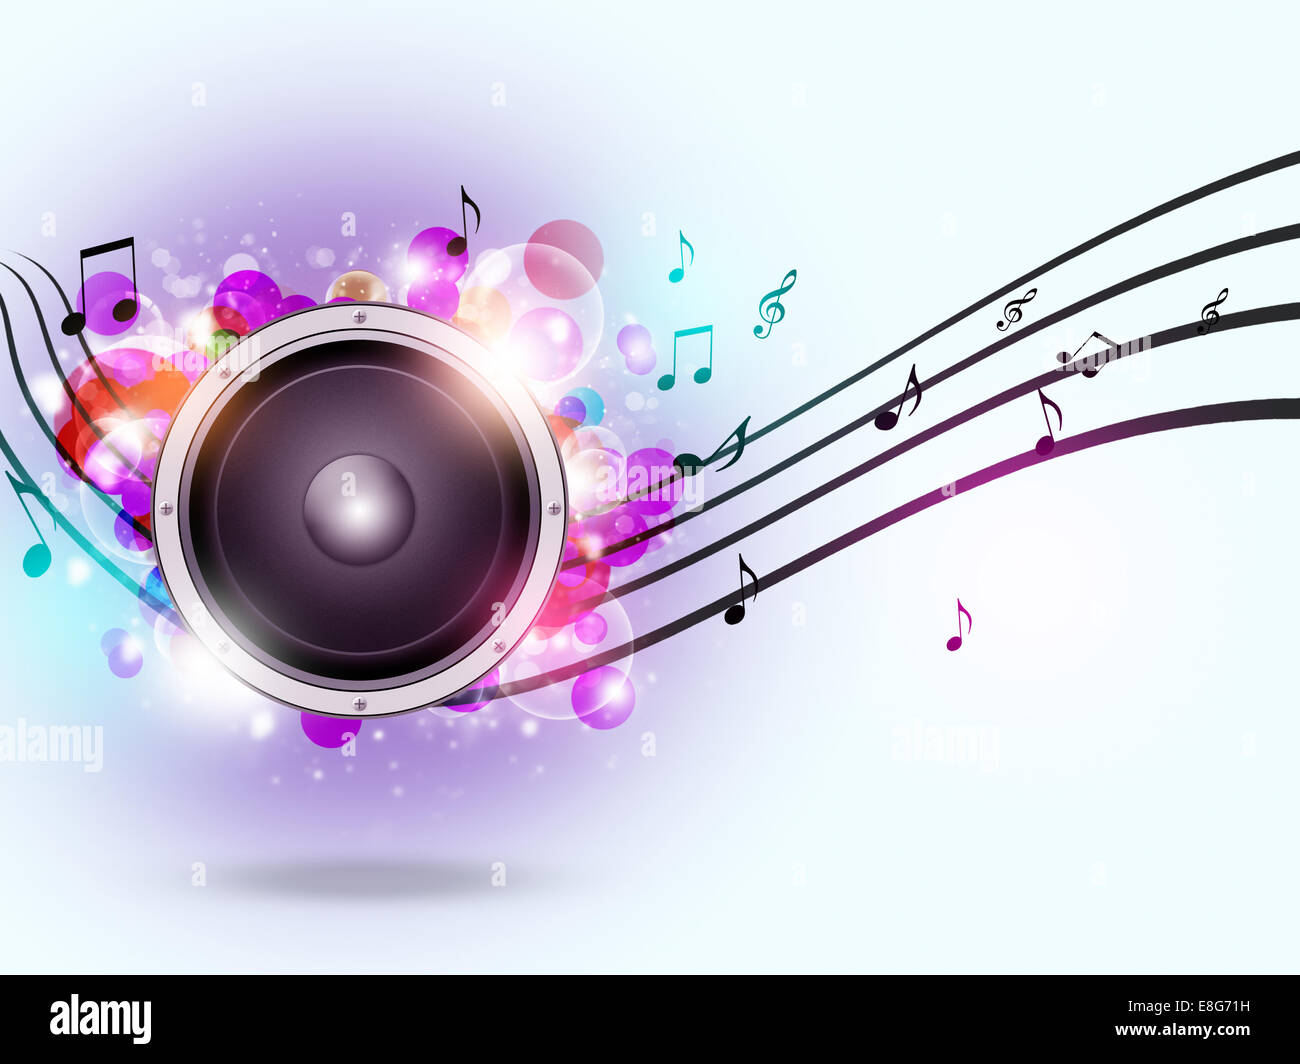 sound speaker music background with muisc notes and blurry lights Stock Photo